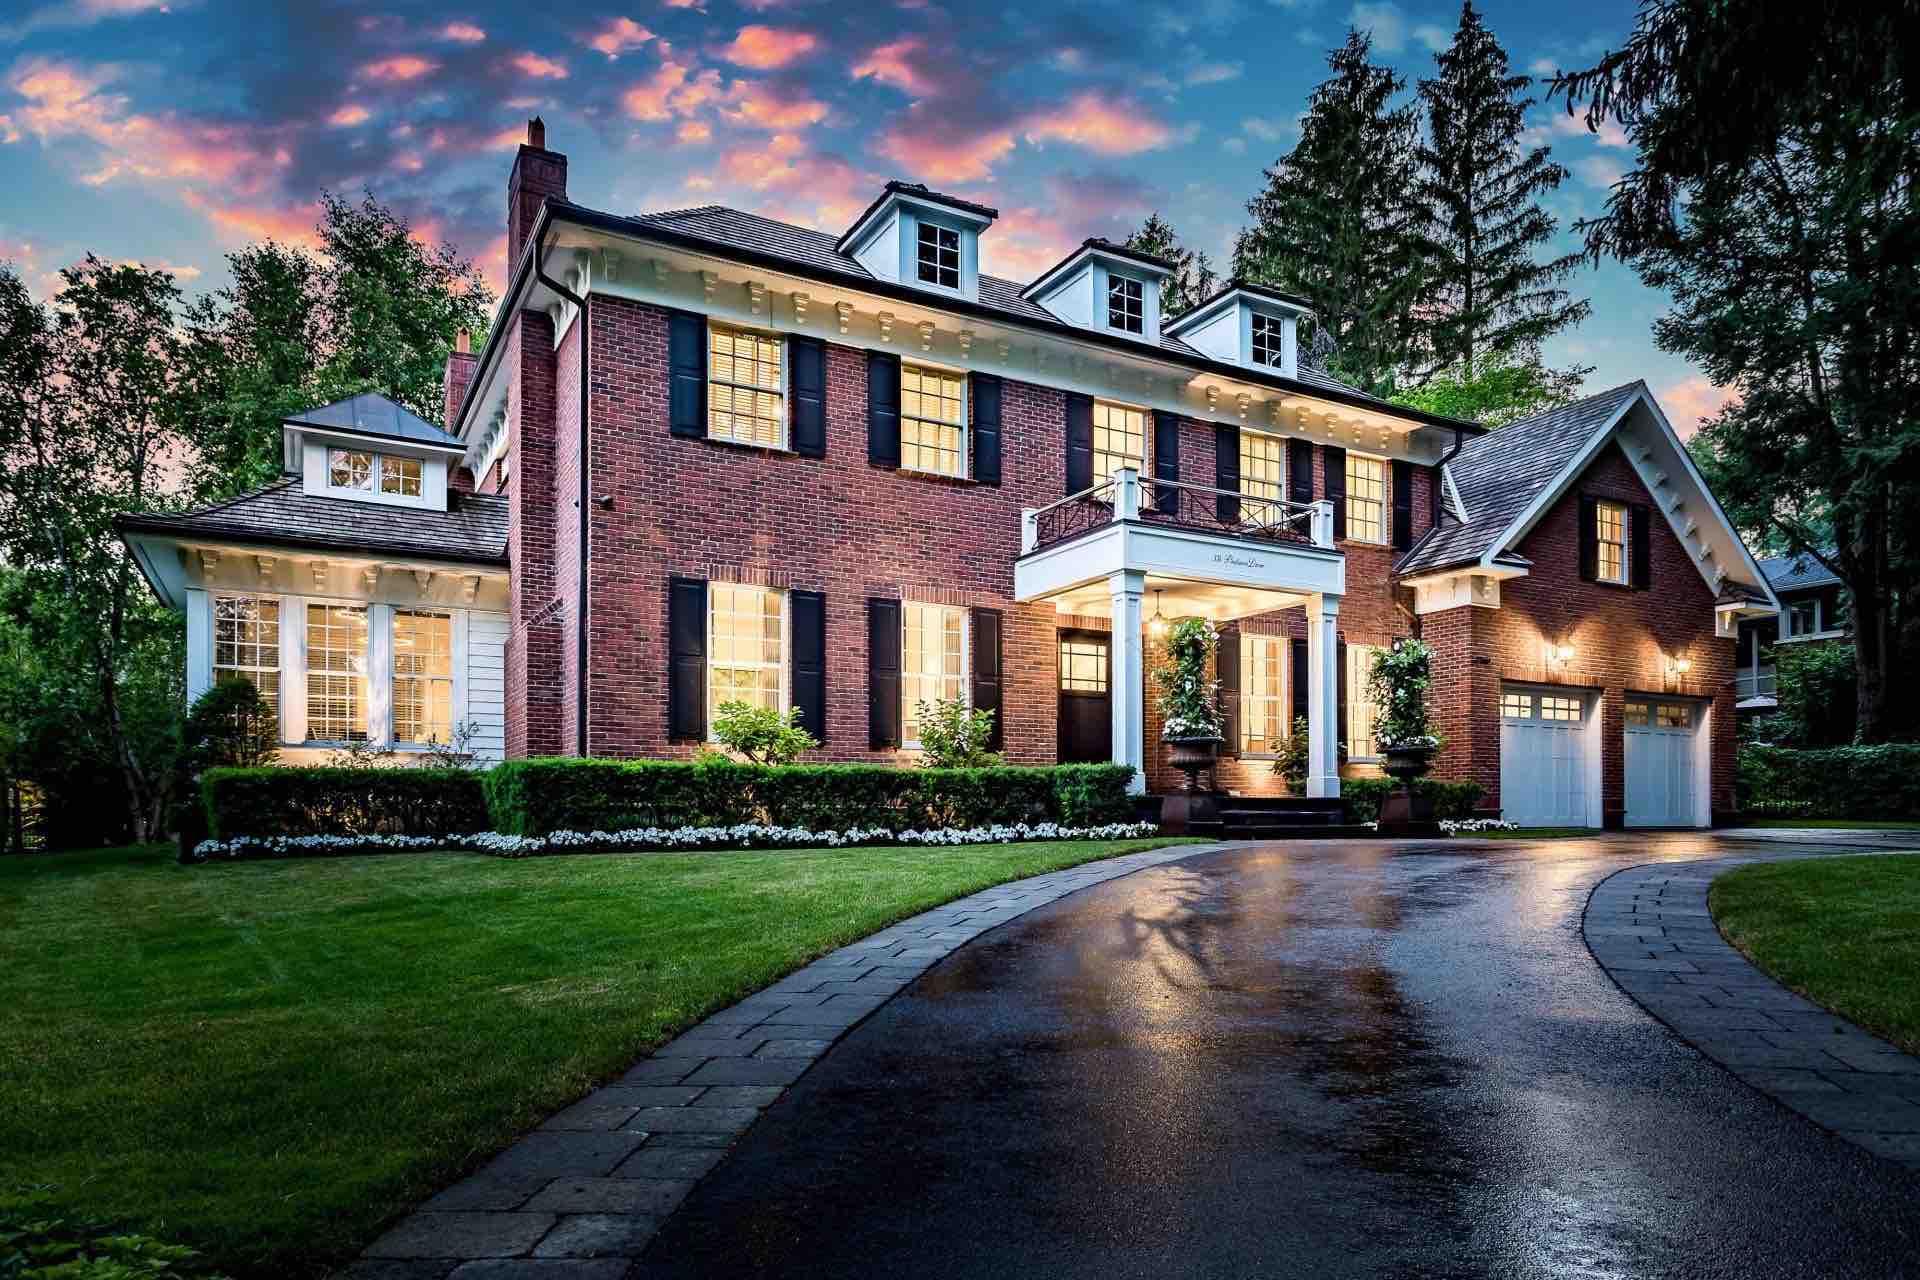 Luxury Ontario Real Estate: Luxury Homes for Sale in Ontario Canada